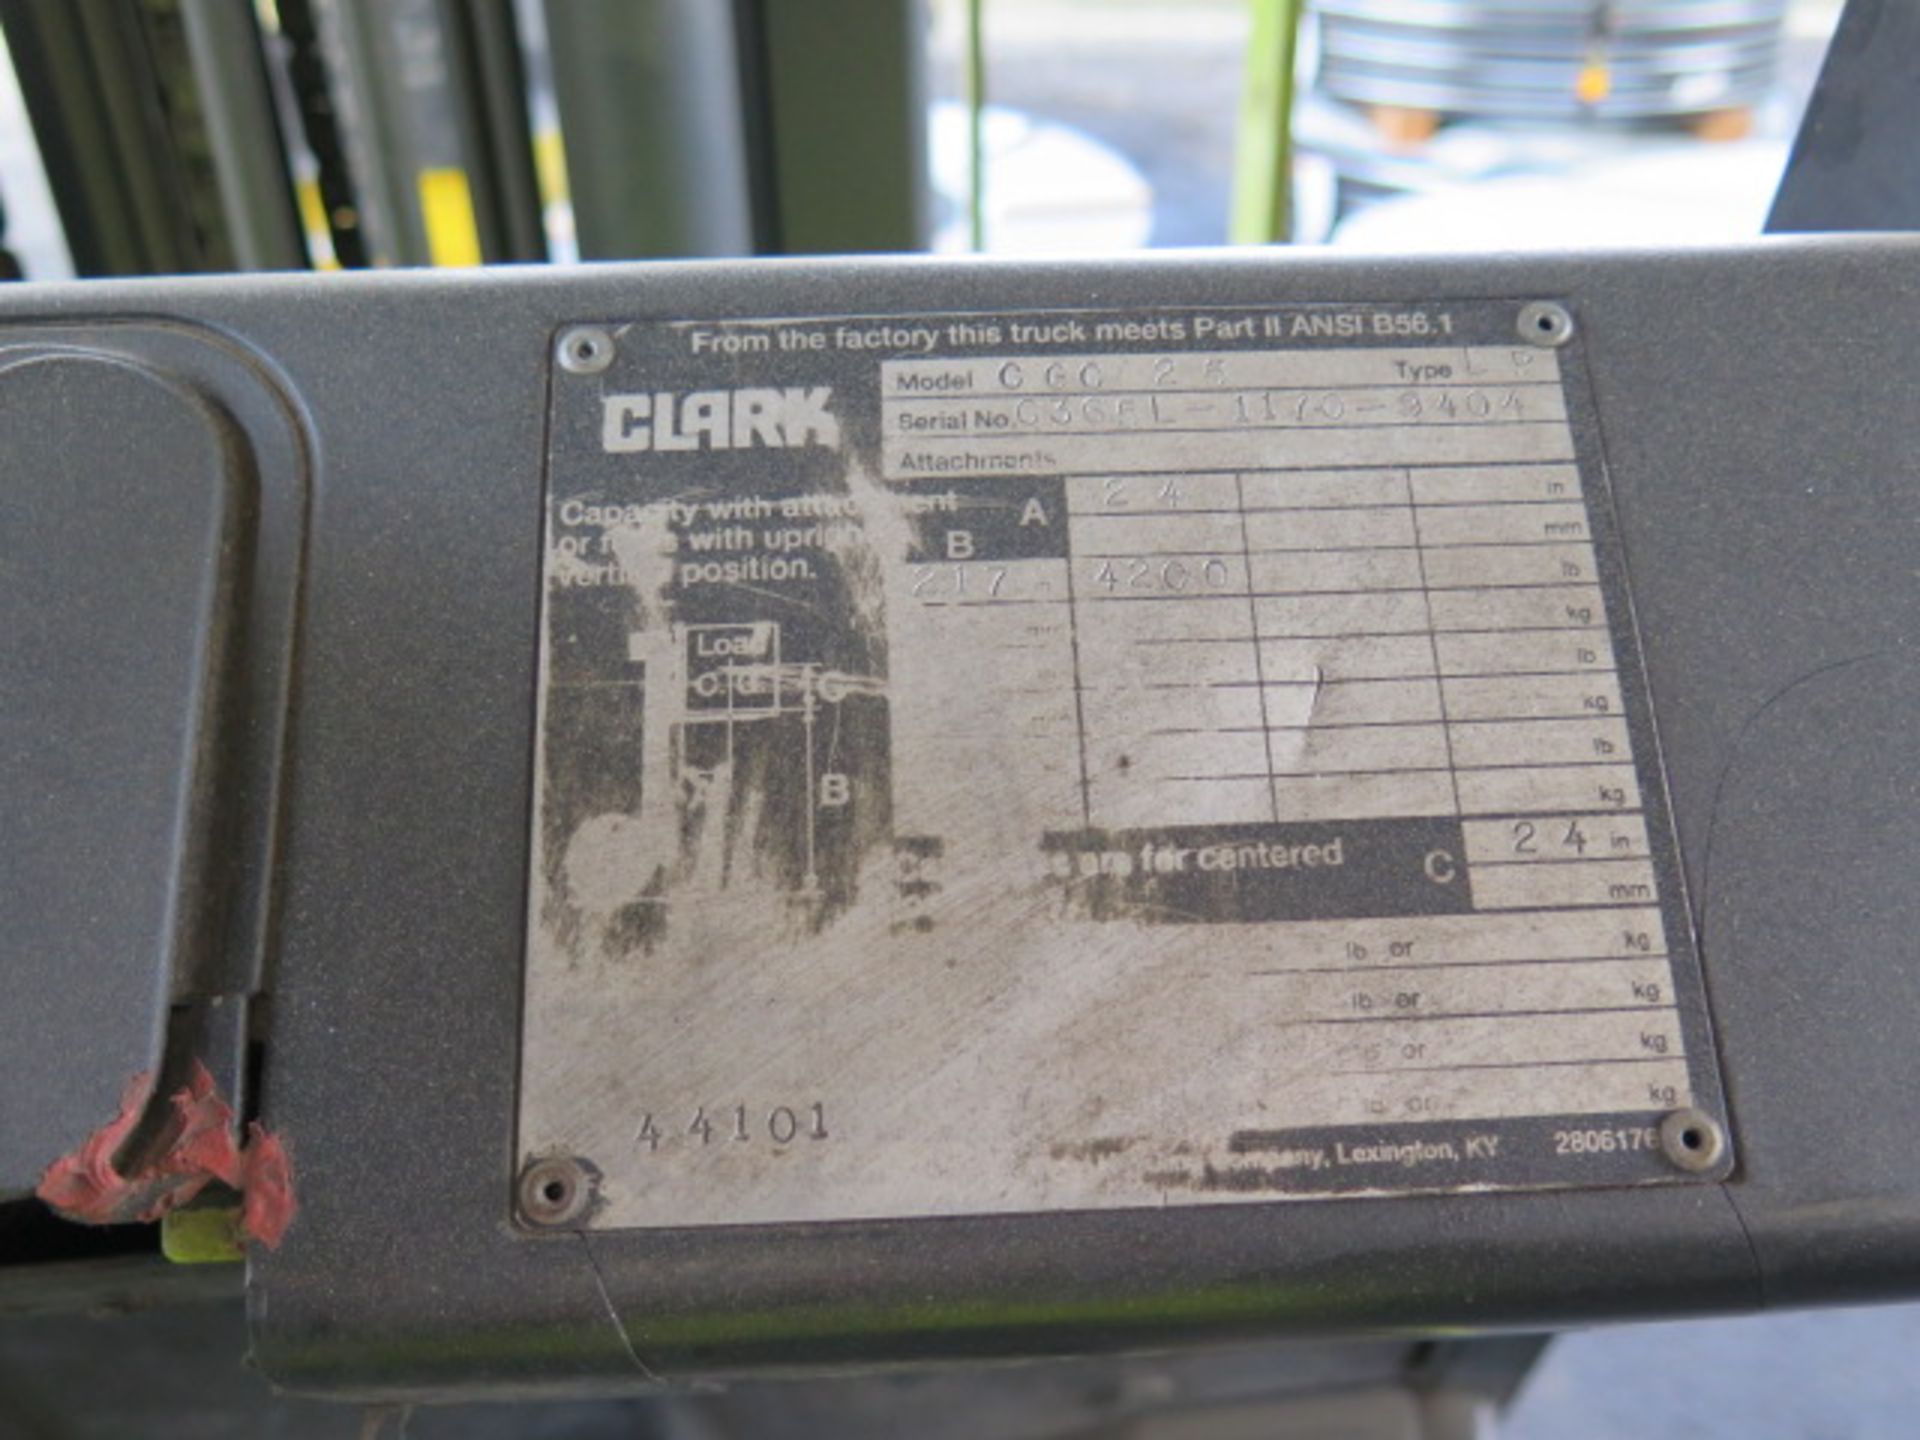 Clark CGC25 4200 Lb LPG Forklift s/n C365L-1170-9404 w/ 3-Stage Mast, 217” Lift Height, SOLD AS IS - Image 15 of 16